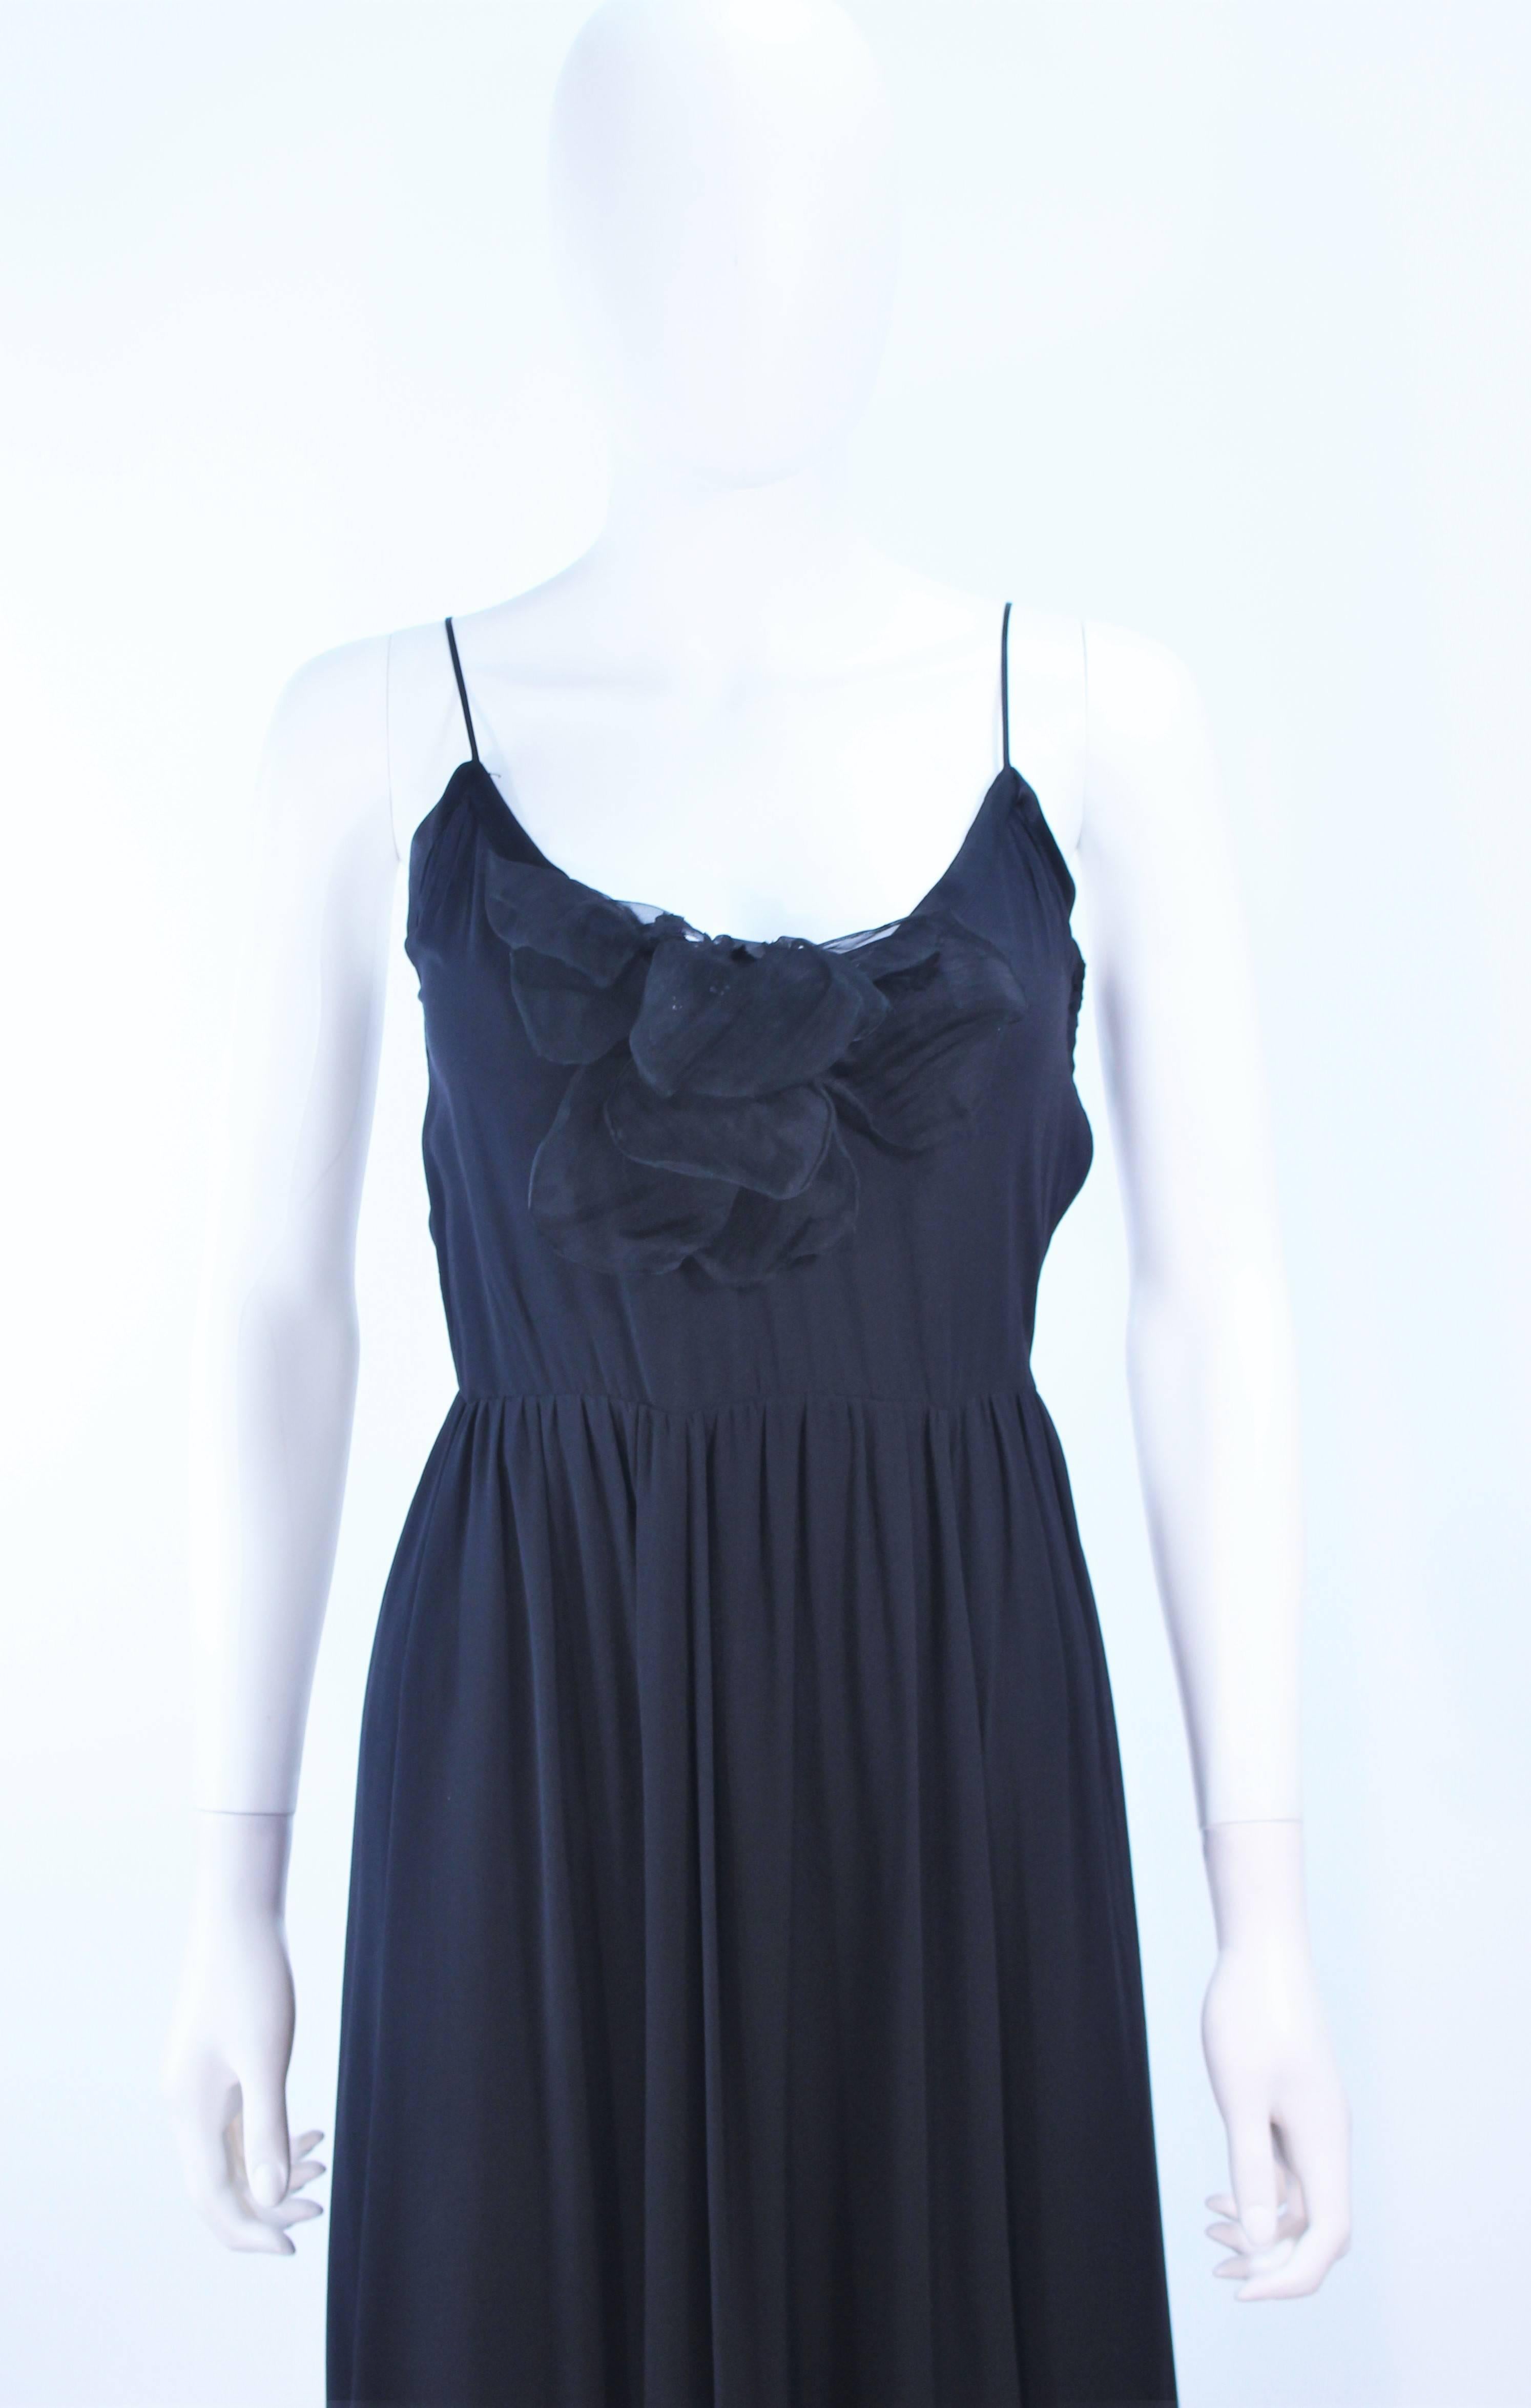 MAGGY REEVES Black Silk Chiffon Cocktail Dress with Floral & Lace Accent Size 2  In Excellent Condition For Sale In Los Angeles, CA